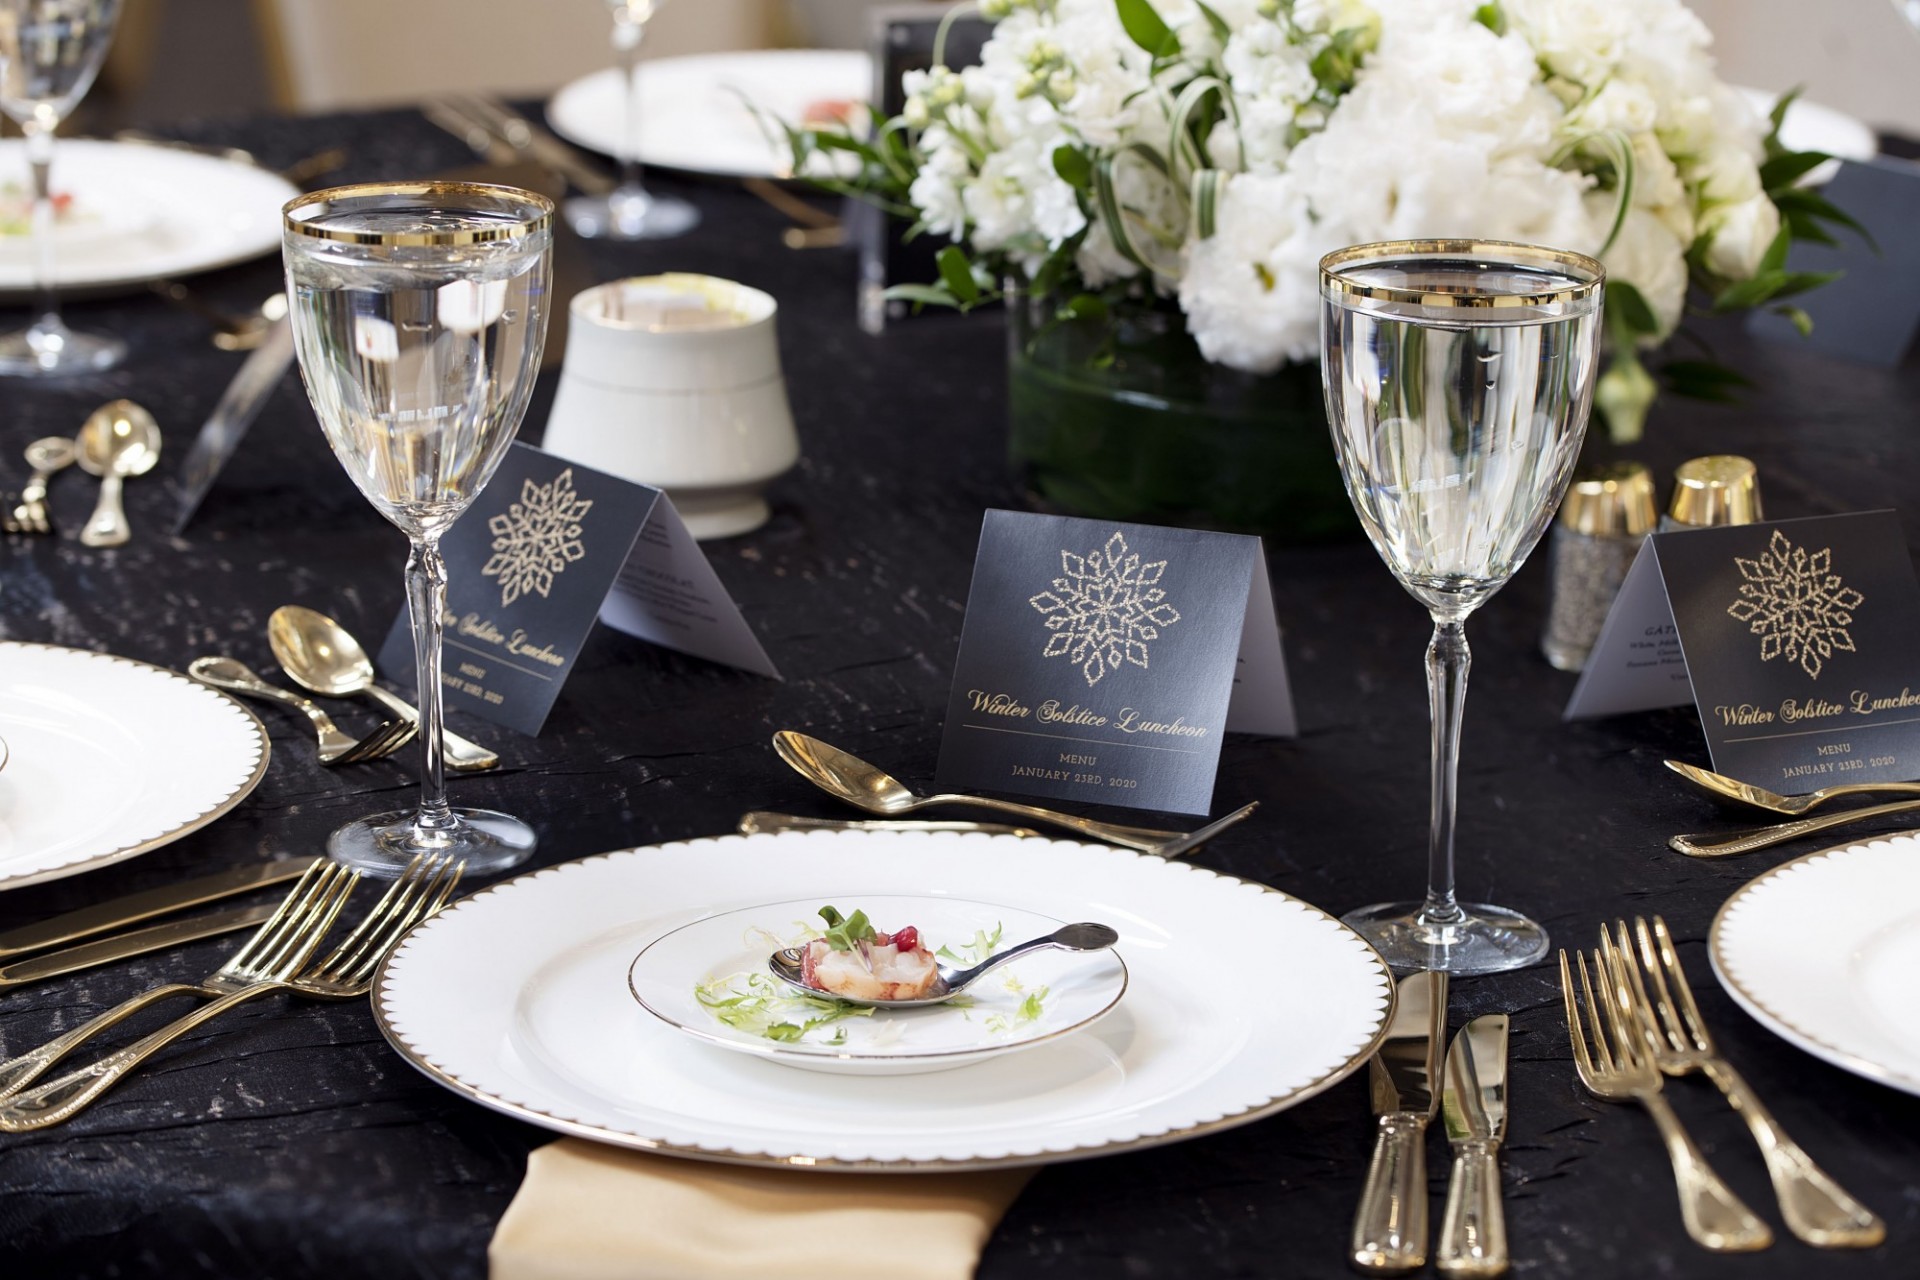 A table set elegantly for an event.